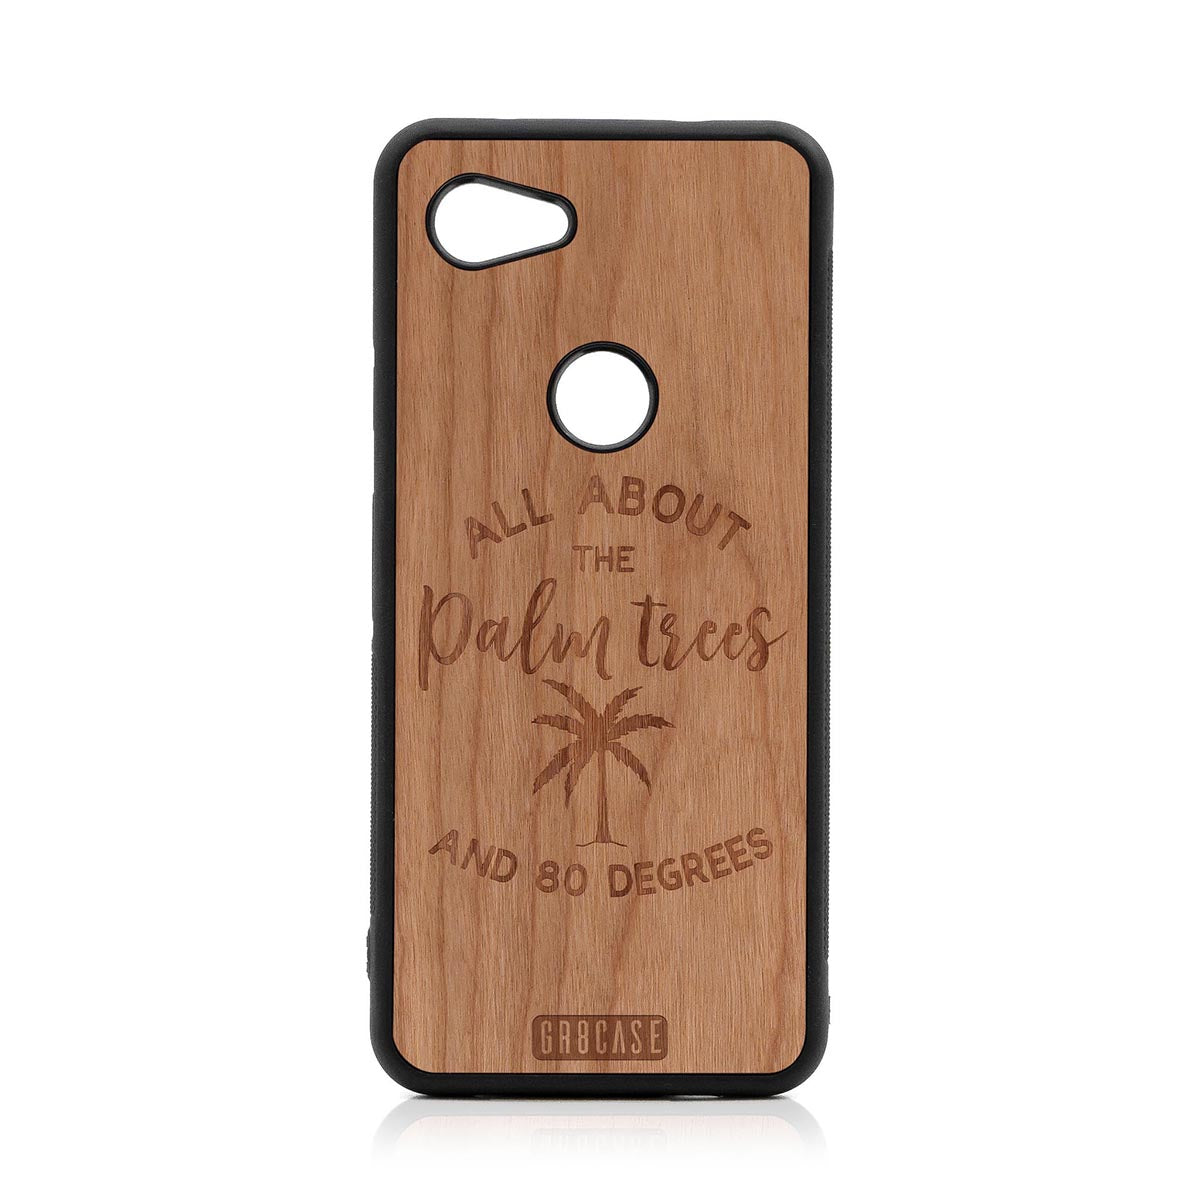 All About The Palm Trees and 80 Degrees Design Wood Case For Google Pixel 3A XL by GR8CASE